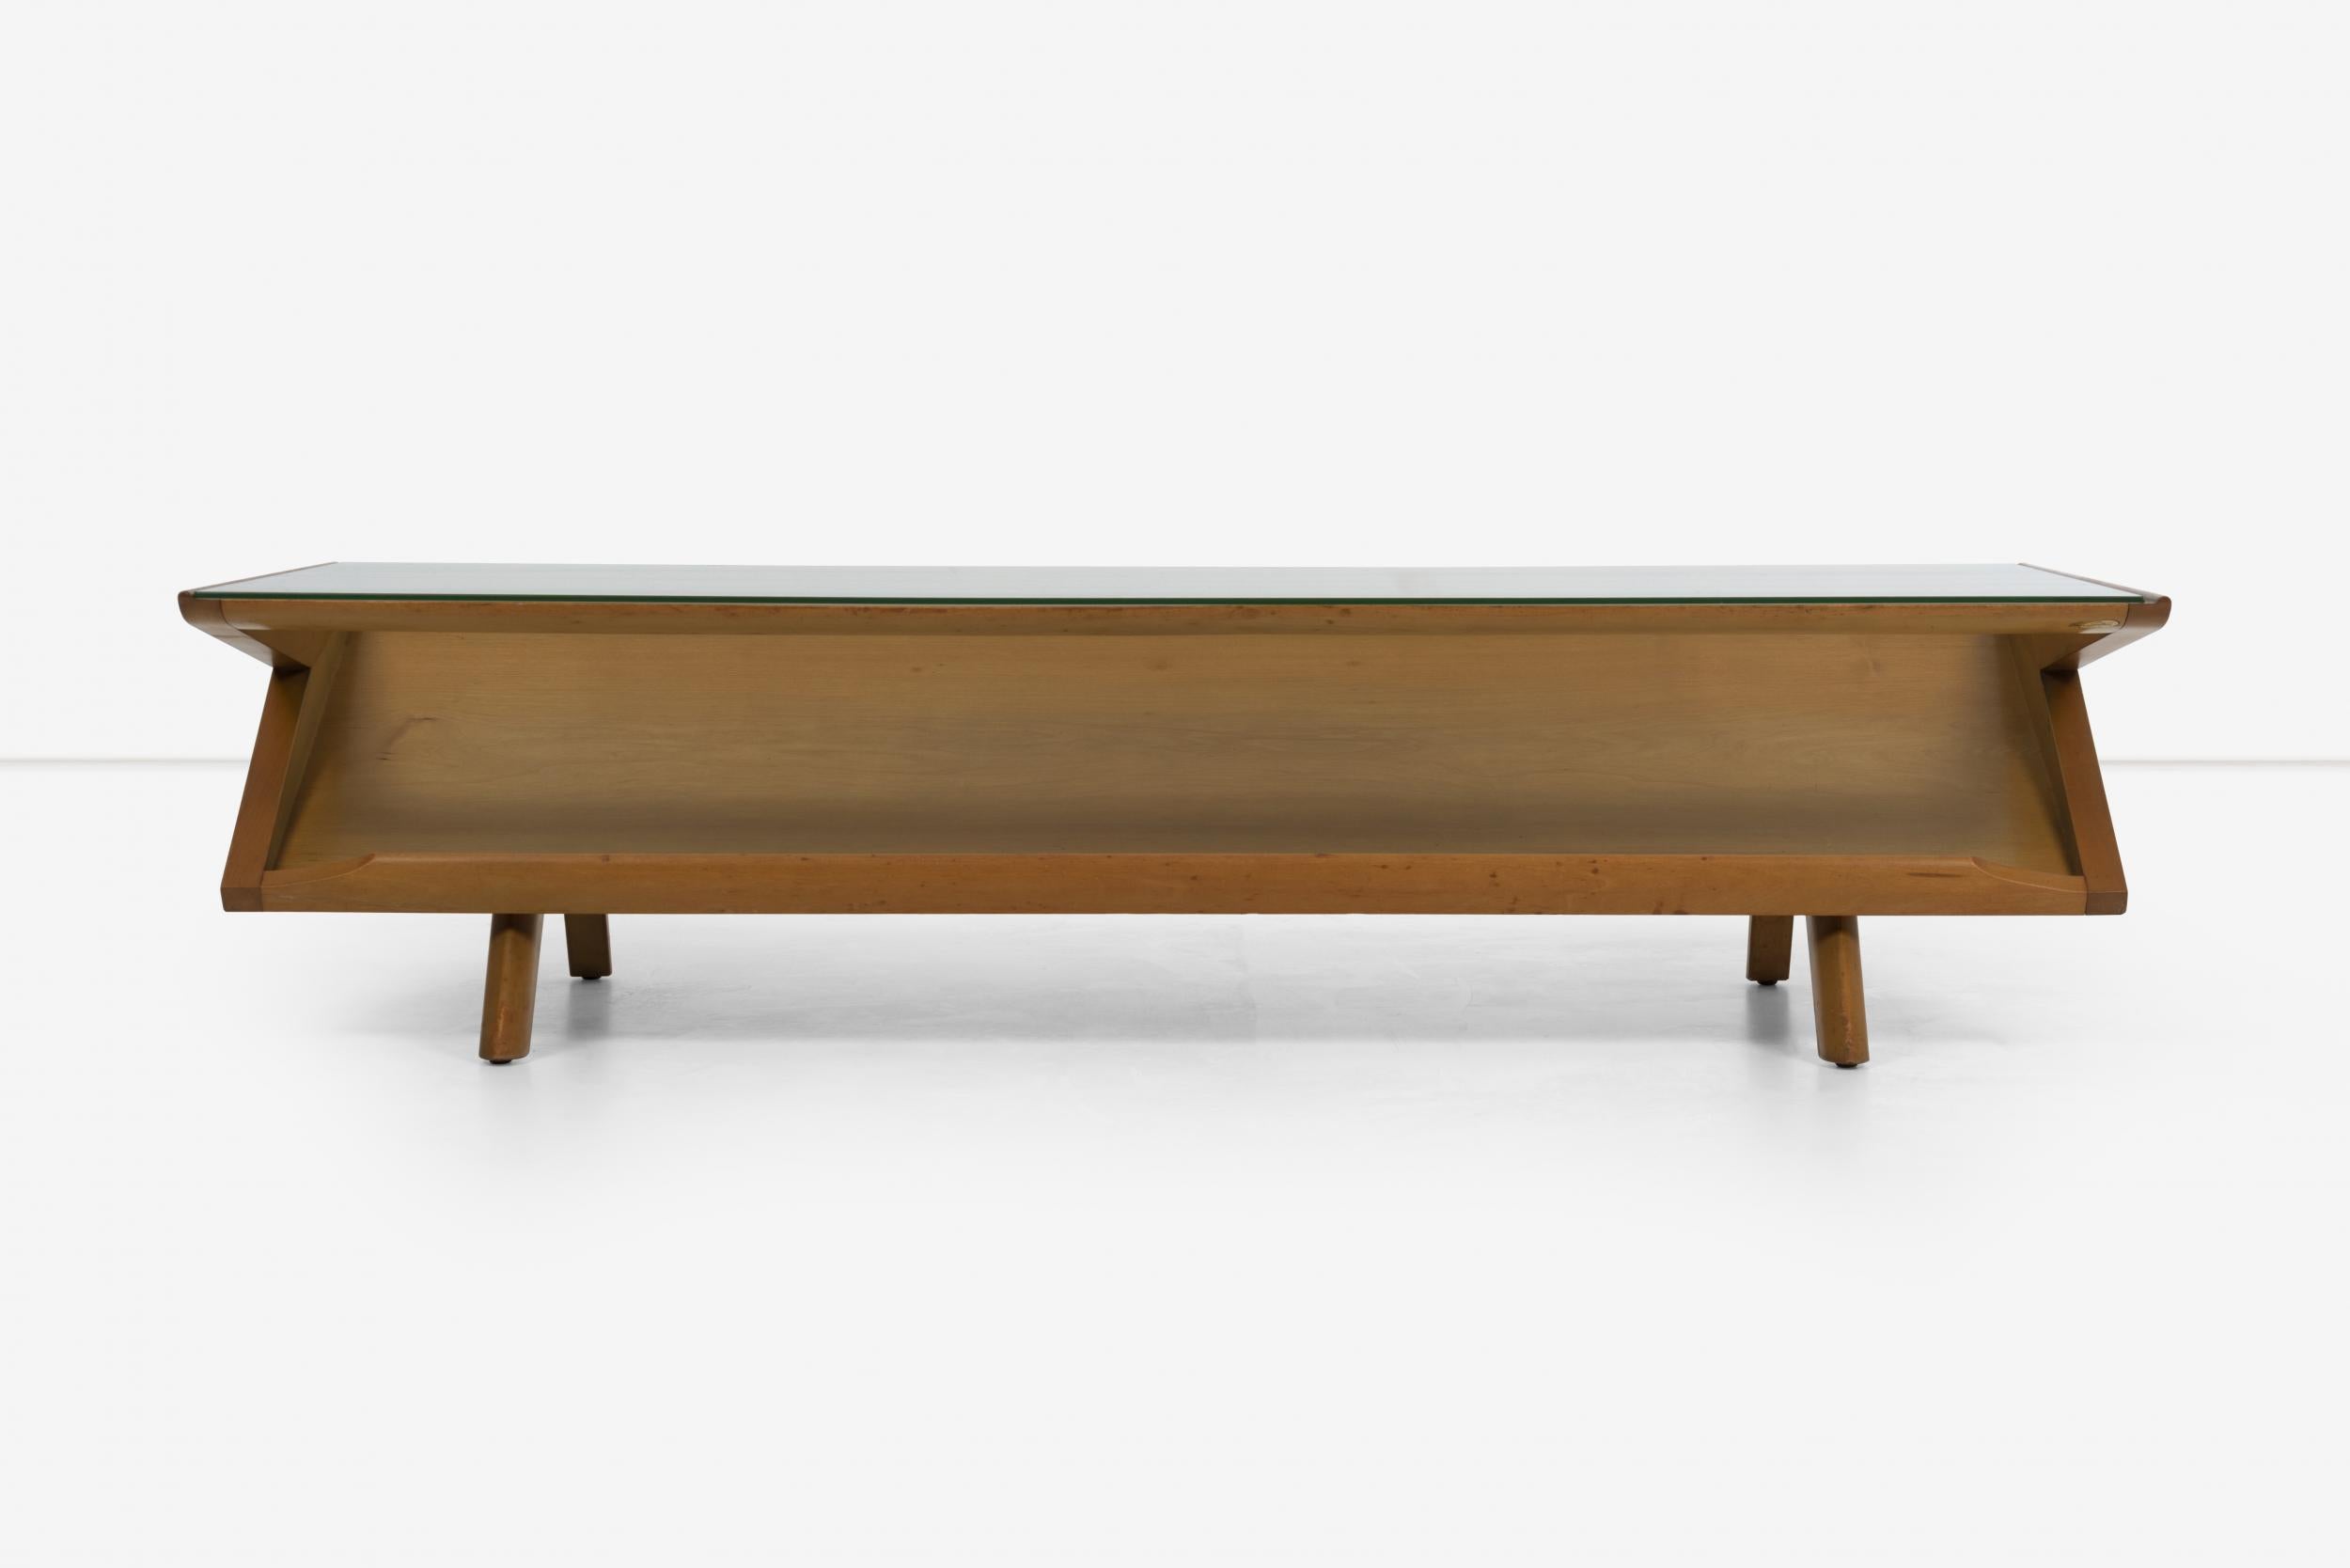 Paul Laszlo for Brown and Saltman display coffee table
Maple-Wood frame and angled wood structure with ledge and glass top for book or magazine display.